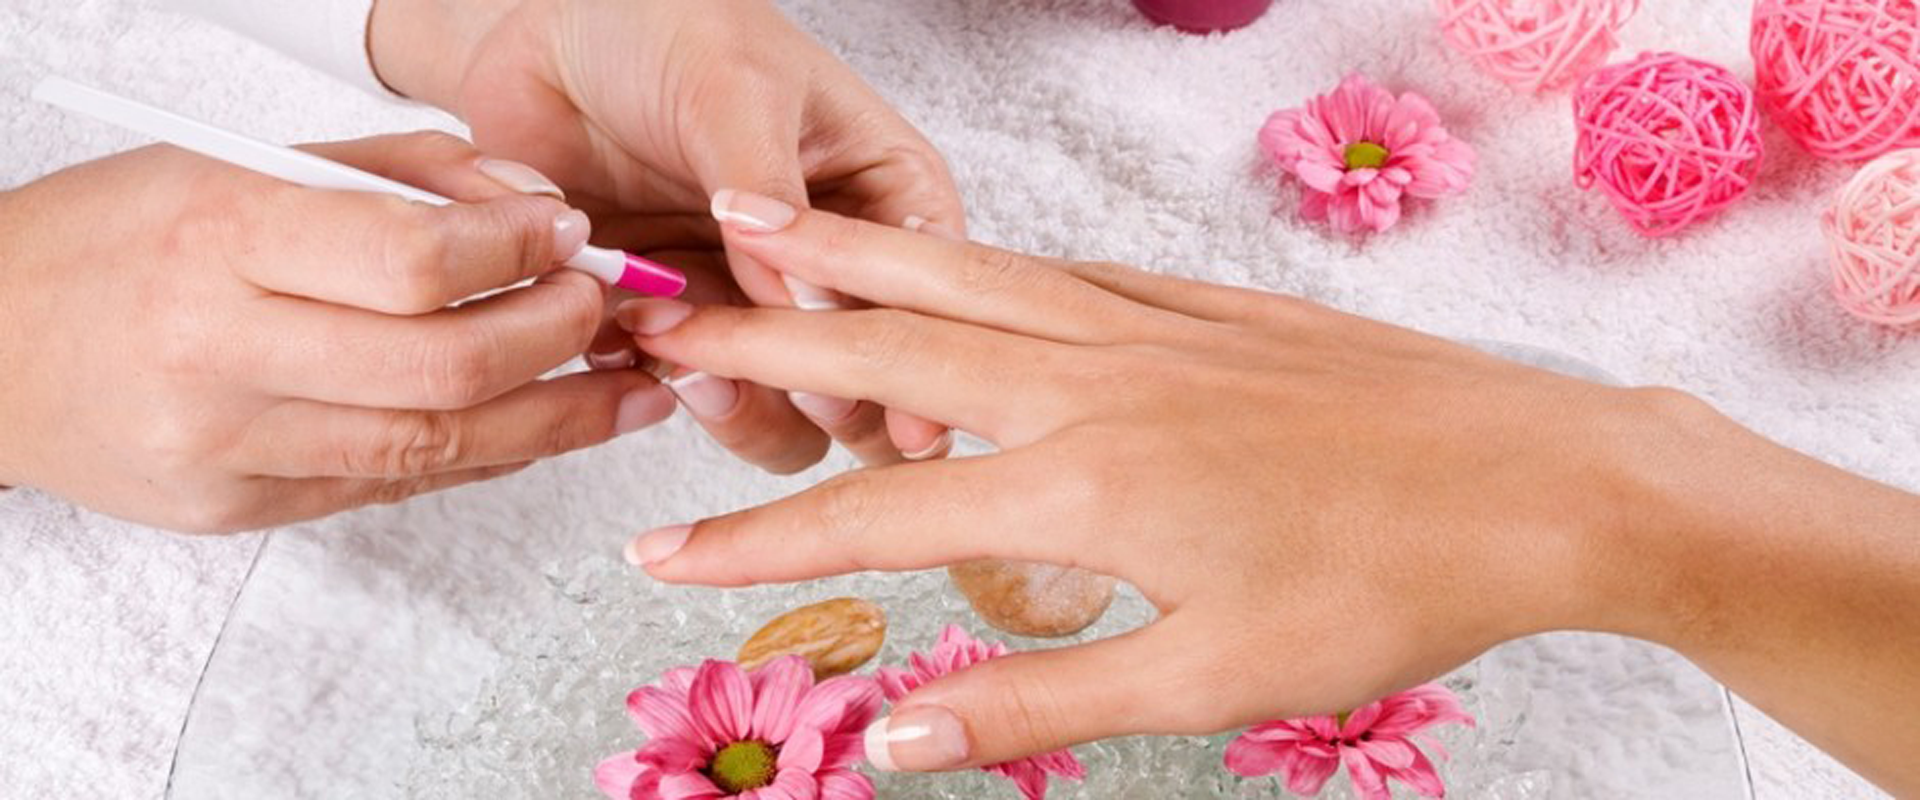 1. Best Nail Salons in Los Angeles - wide 4